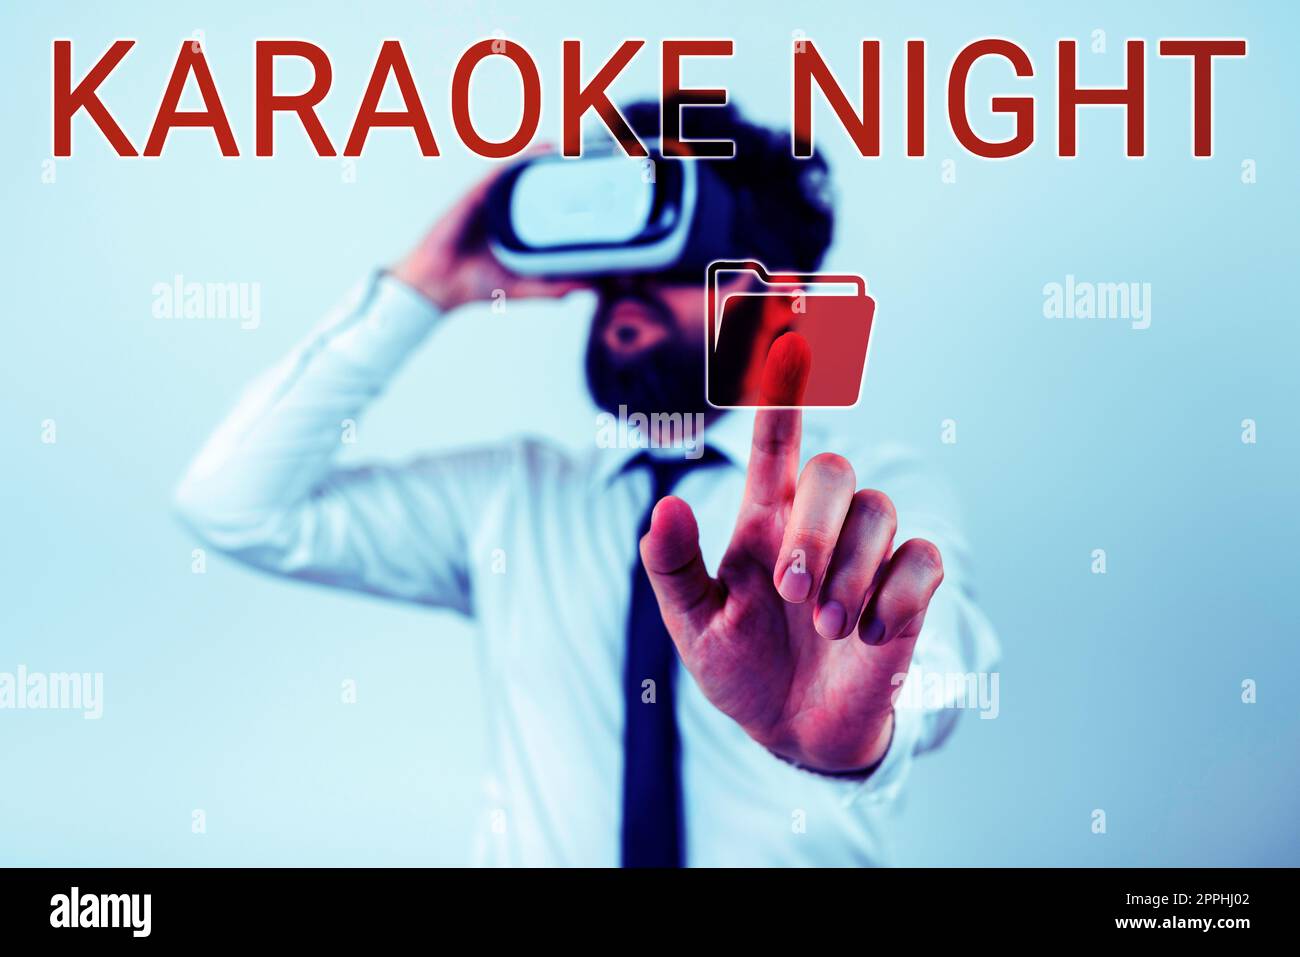 Sign displaying Karaoke Night. Business idea Entertainment singing along instrumental music played by a machine Stock Photo